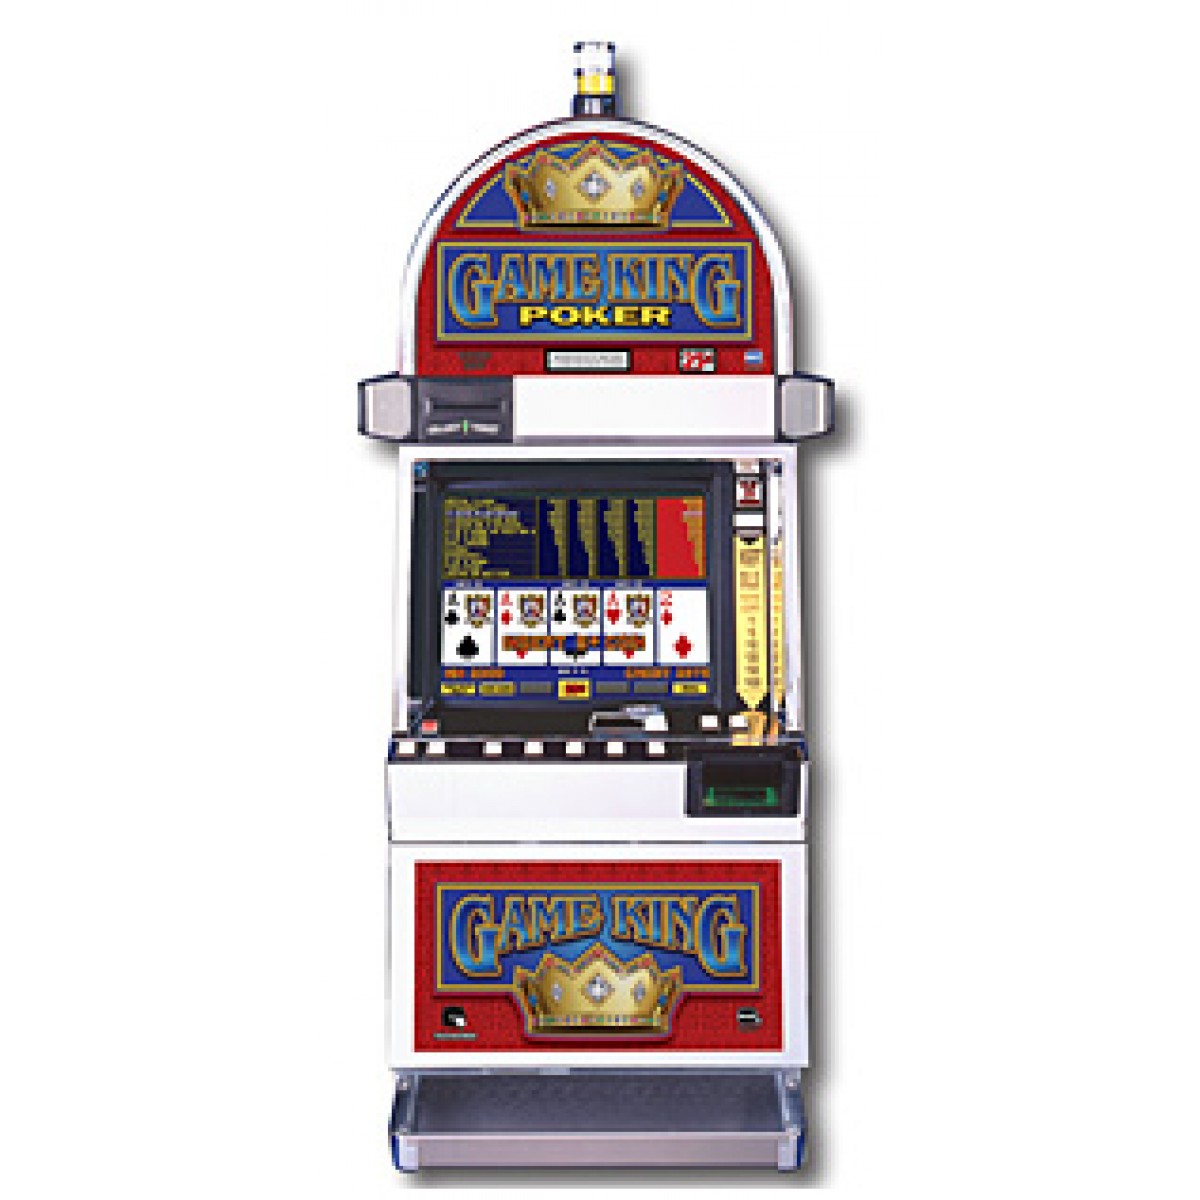 Igt slot games for pc